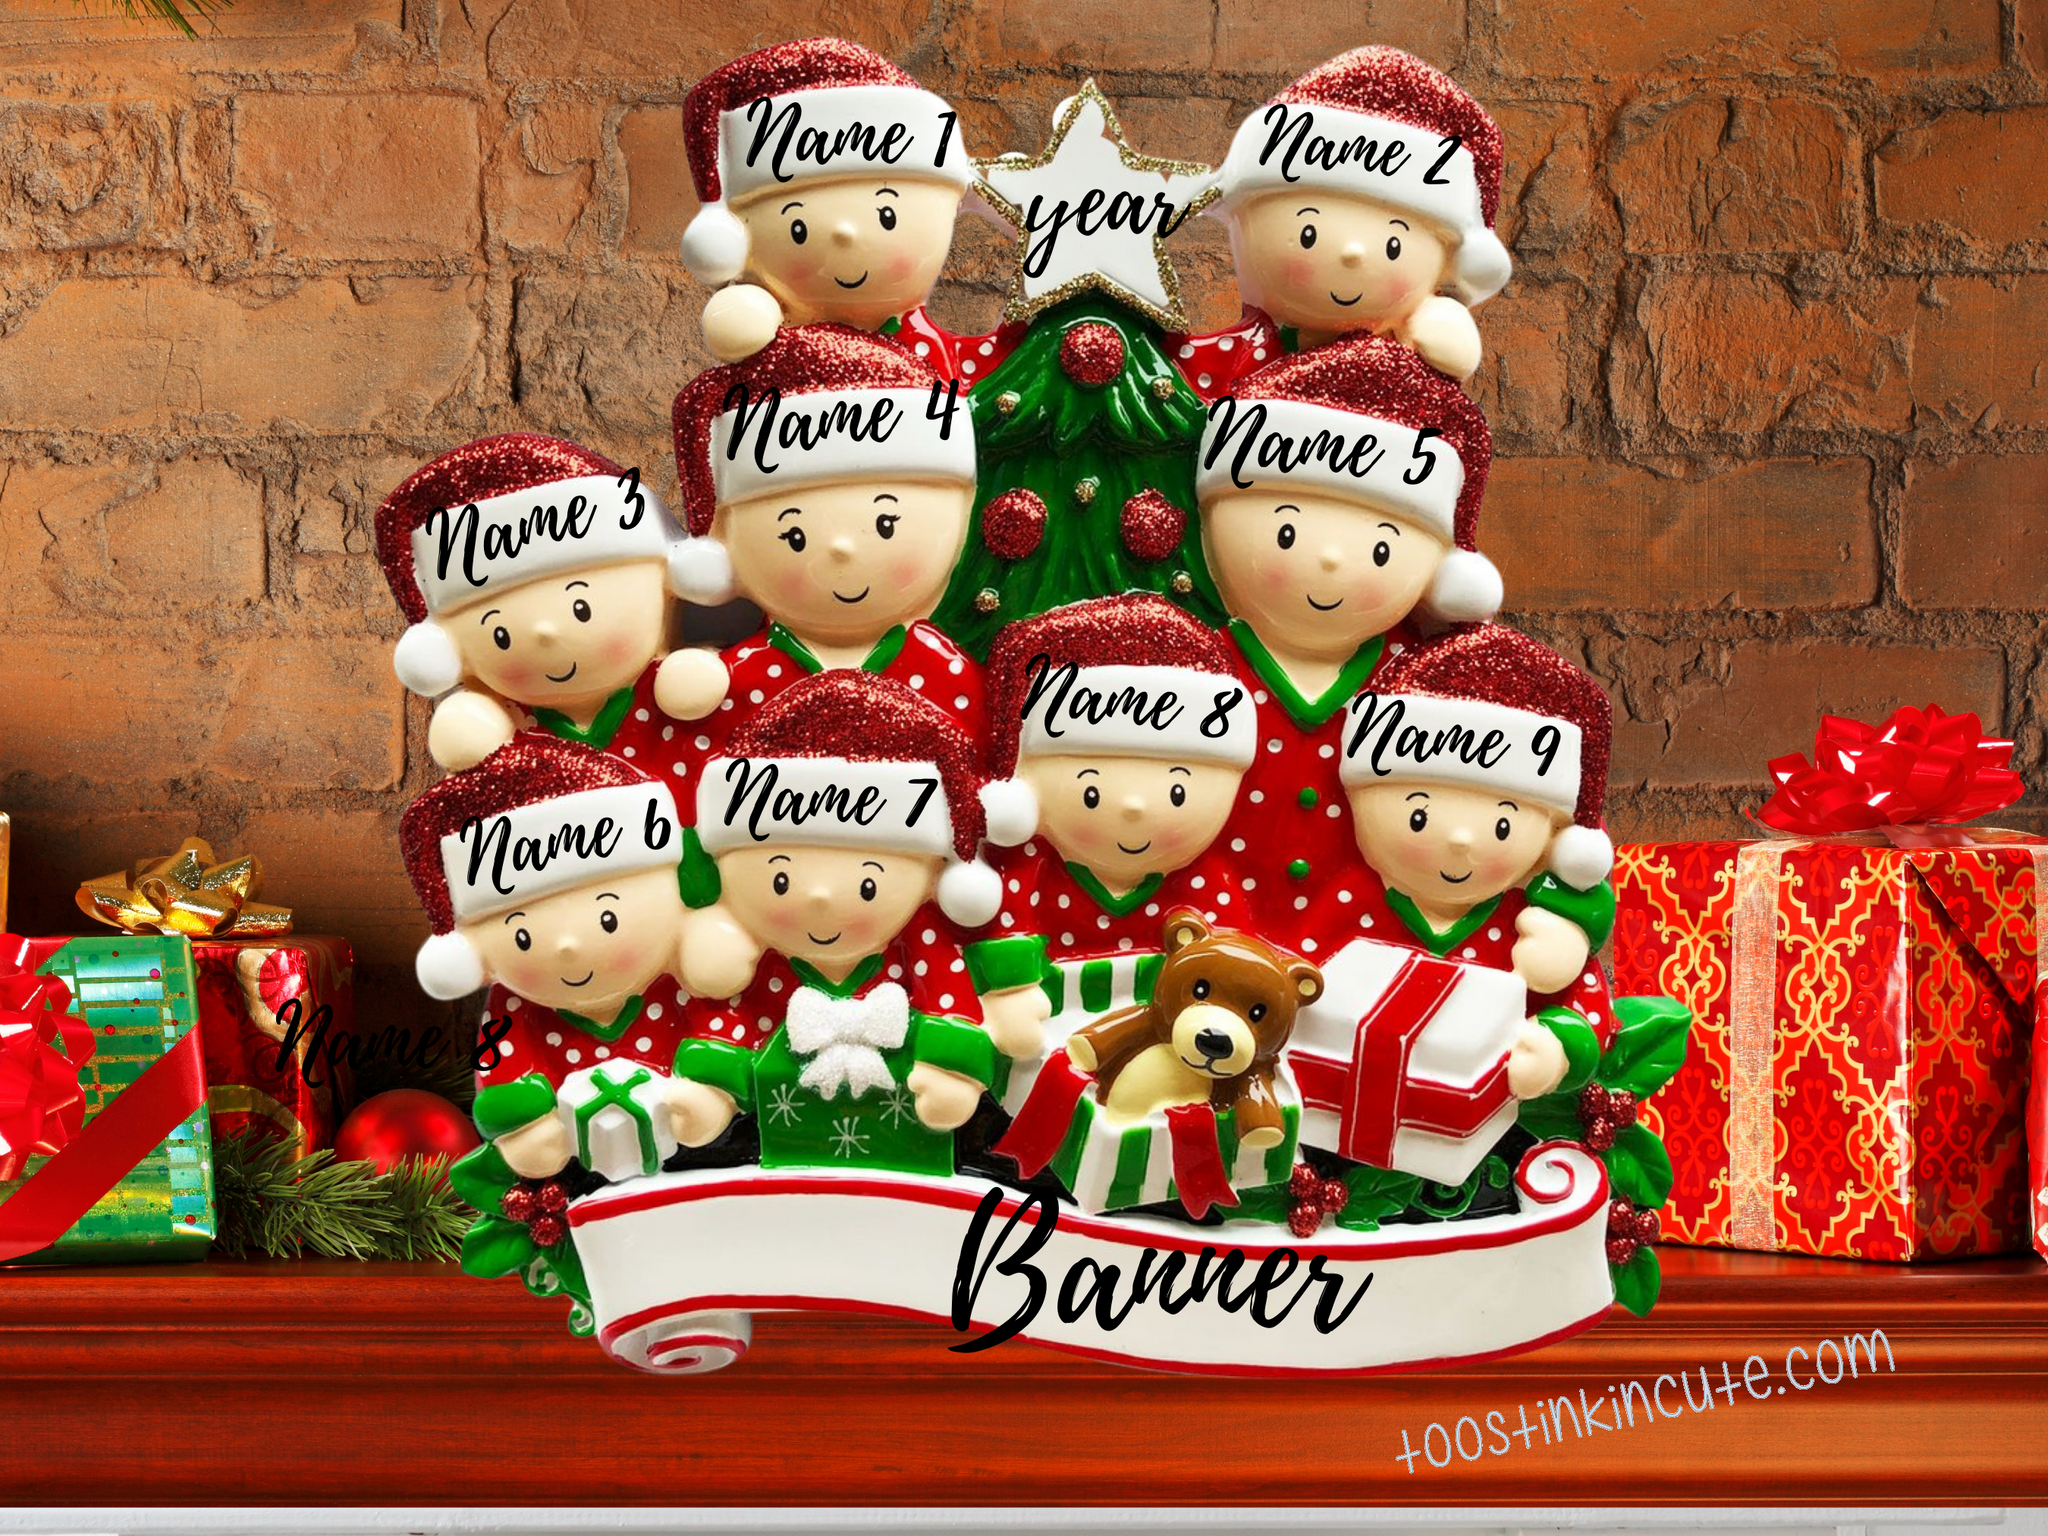 Table Topper Pajama Family Opening Presents Family of 9 Personalized Christmas Table Topper